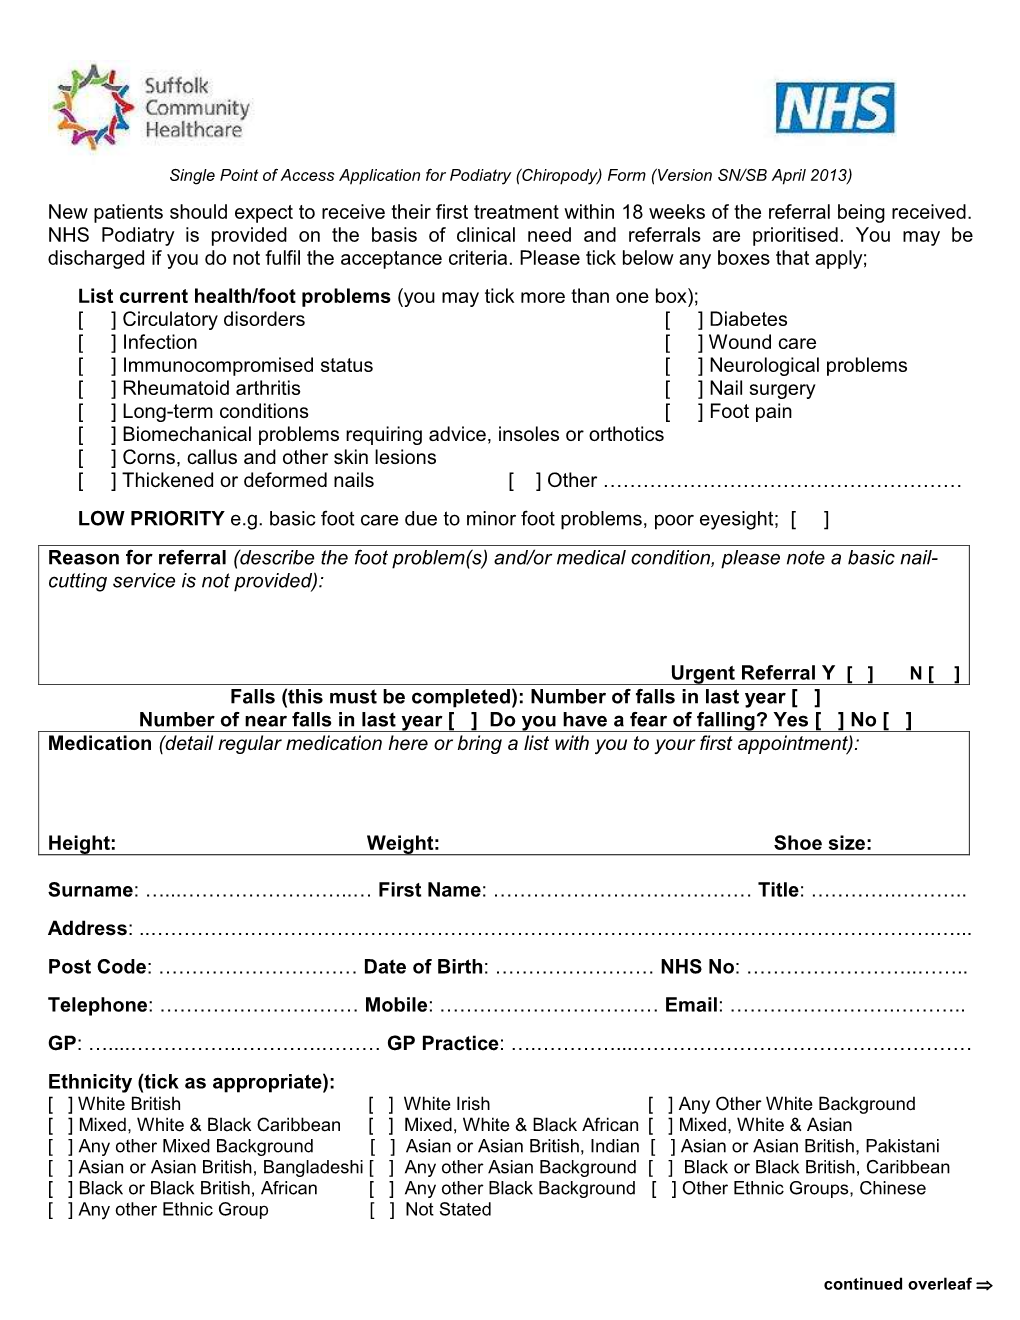 Application for Podiatry (Chiropody) Form (Version SN/SB 06/10)